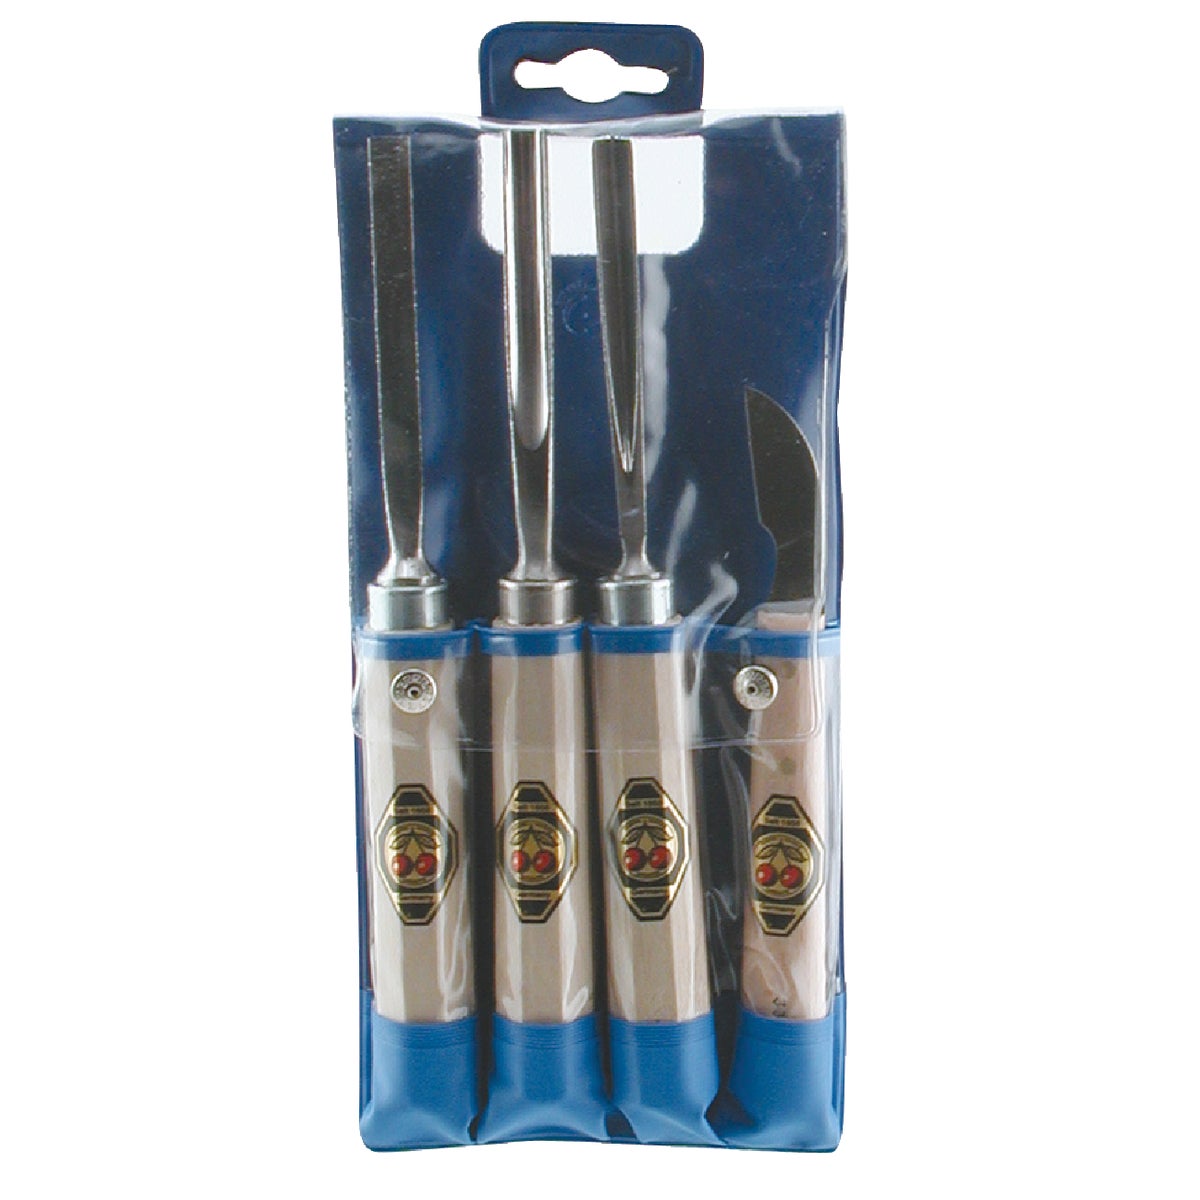 Item 316081, Sets of 4 tools made to the highest Two Cherries standard.